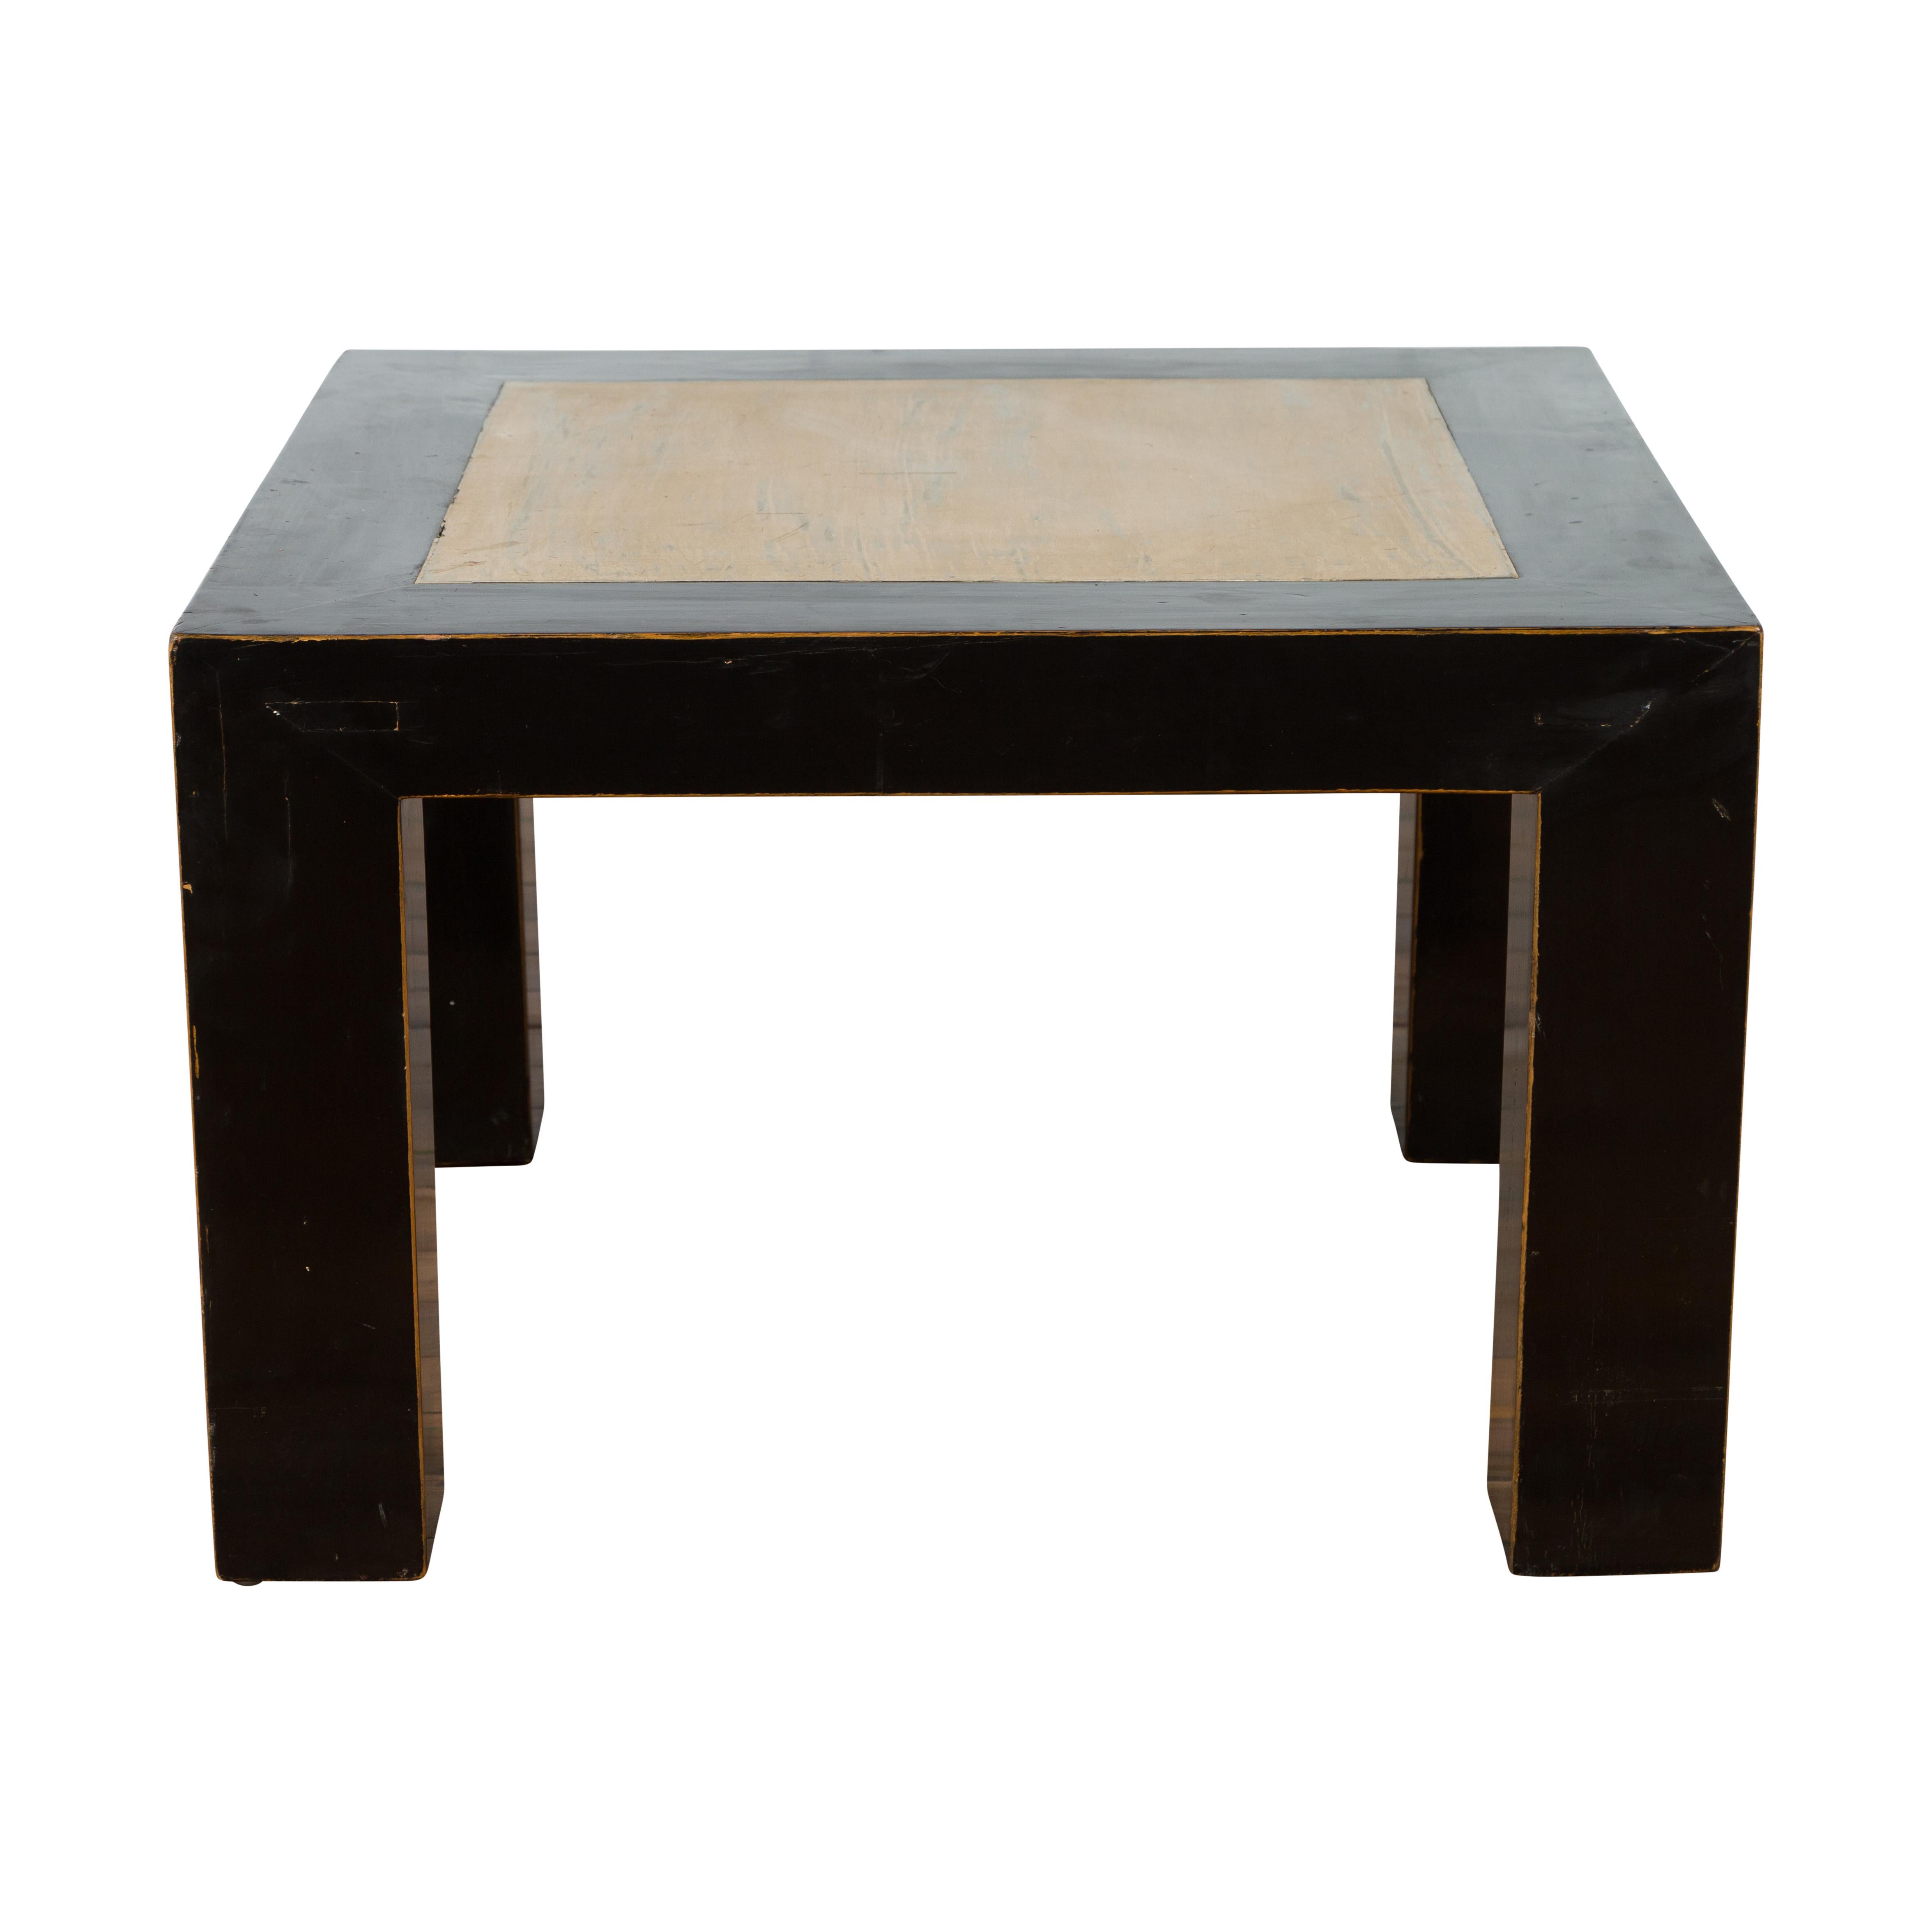 A Chinese vintage square shaped lacquered wood coffee table from the 20th century with antique palace courtyard stone inset and straight legs. Created in China during the 20th century, this square shaped coffee or drinks table features a linear